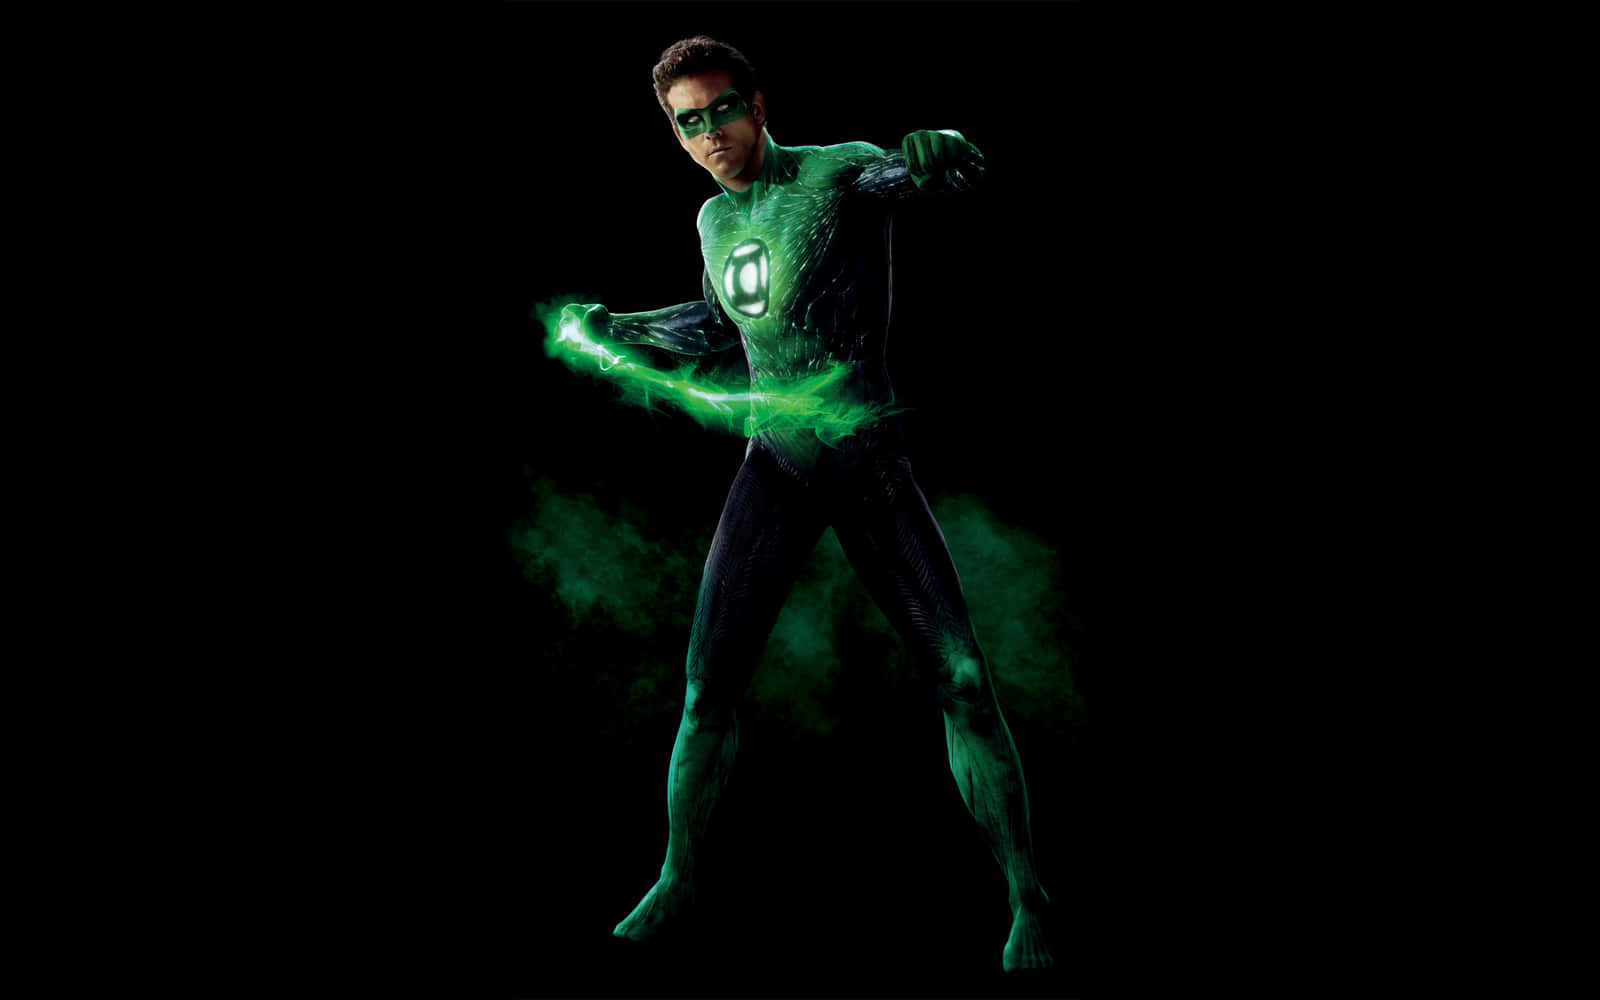 Power of Will: The Green Lantern